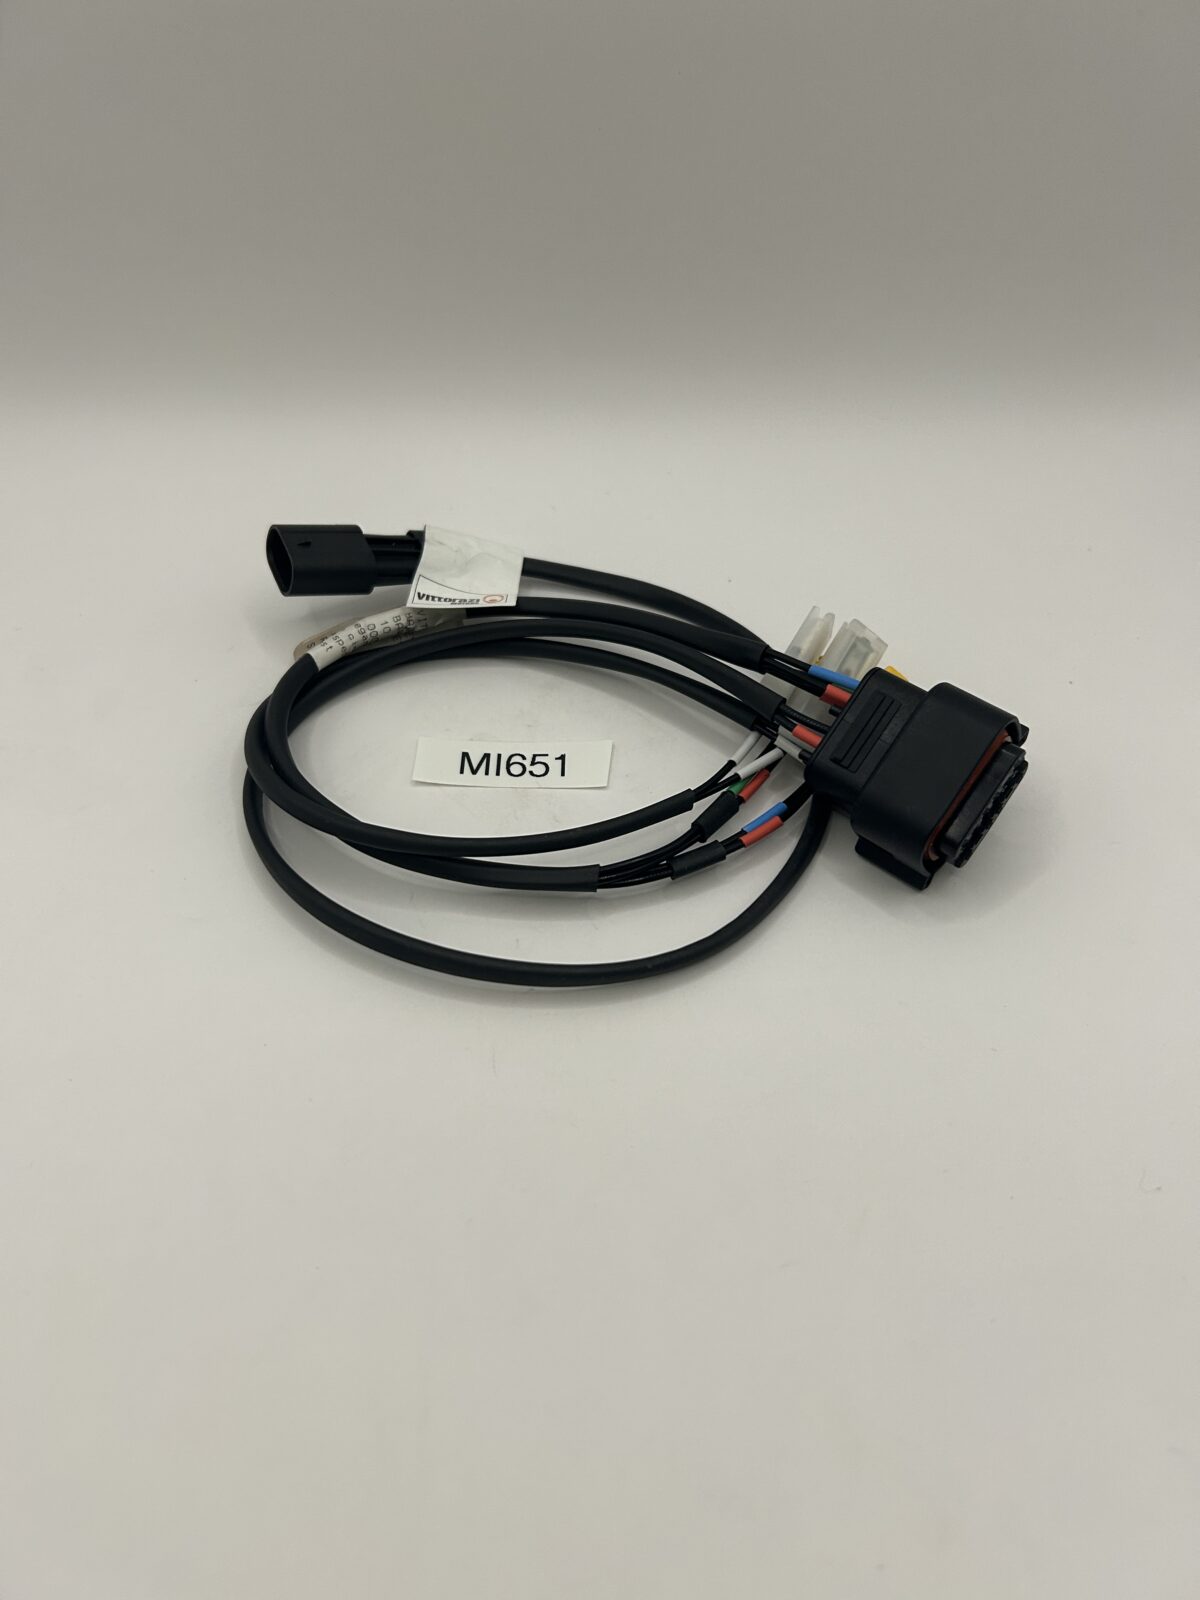 MI651 MosterEFI Sensor and Power Supply Wiring